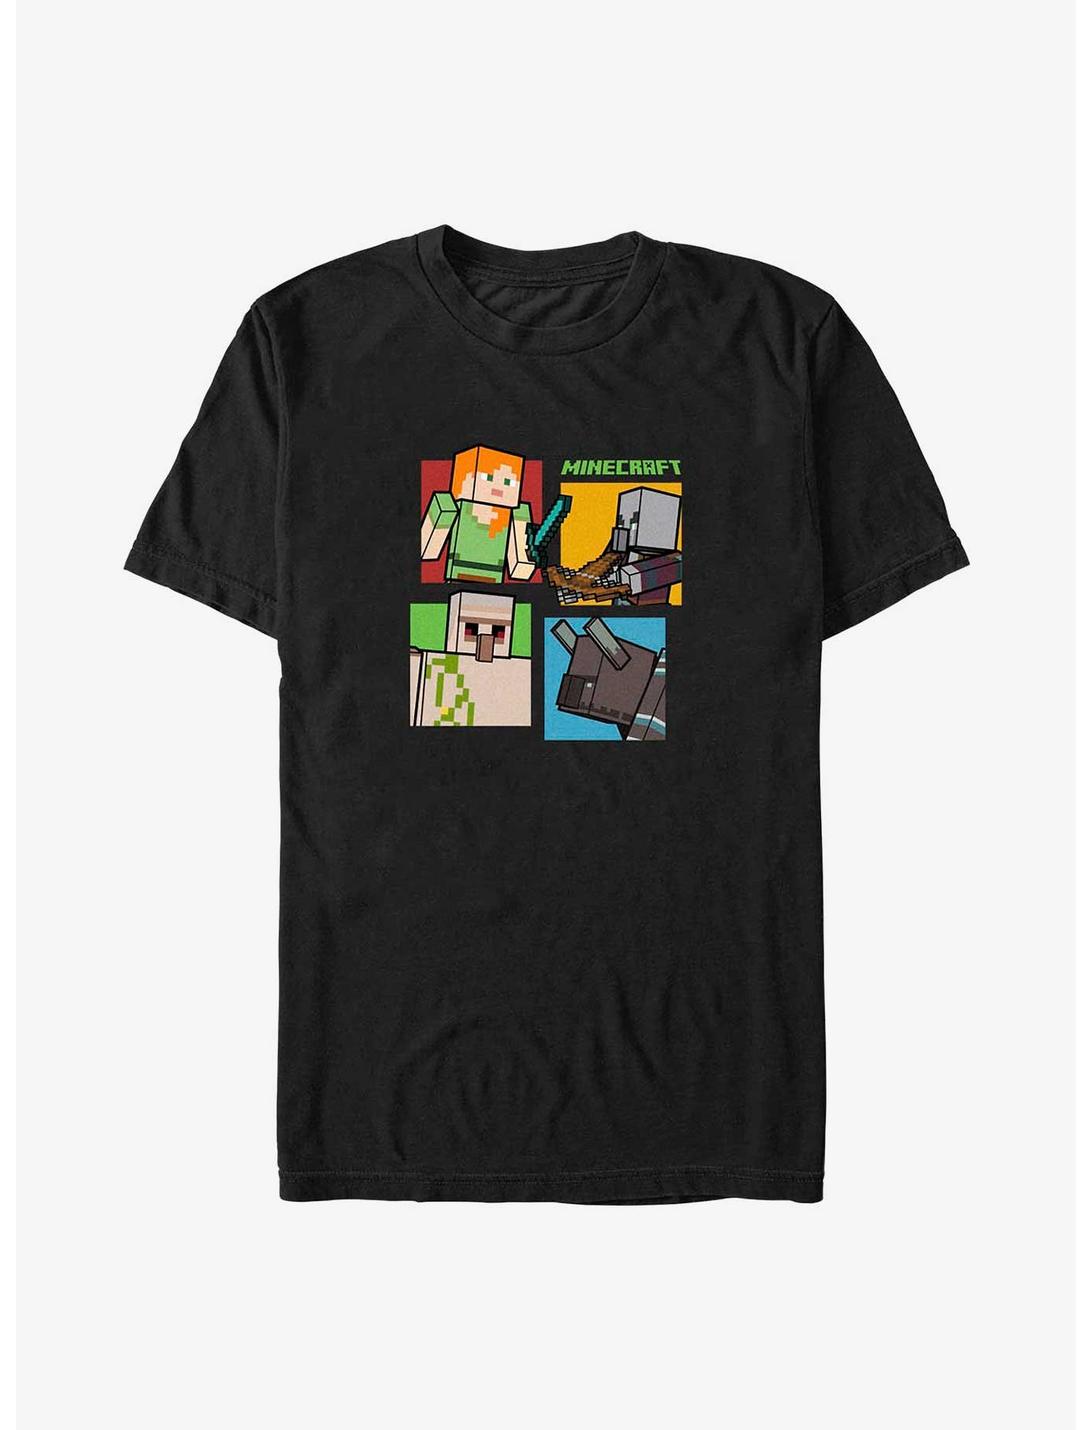 Minecraft Boxed In T-Shirt, BLACK, hi-res